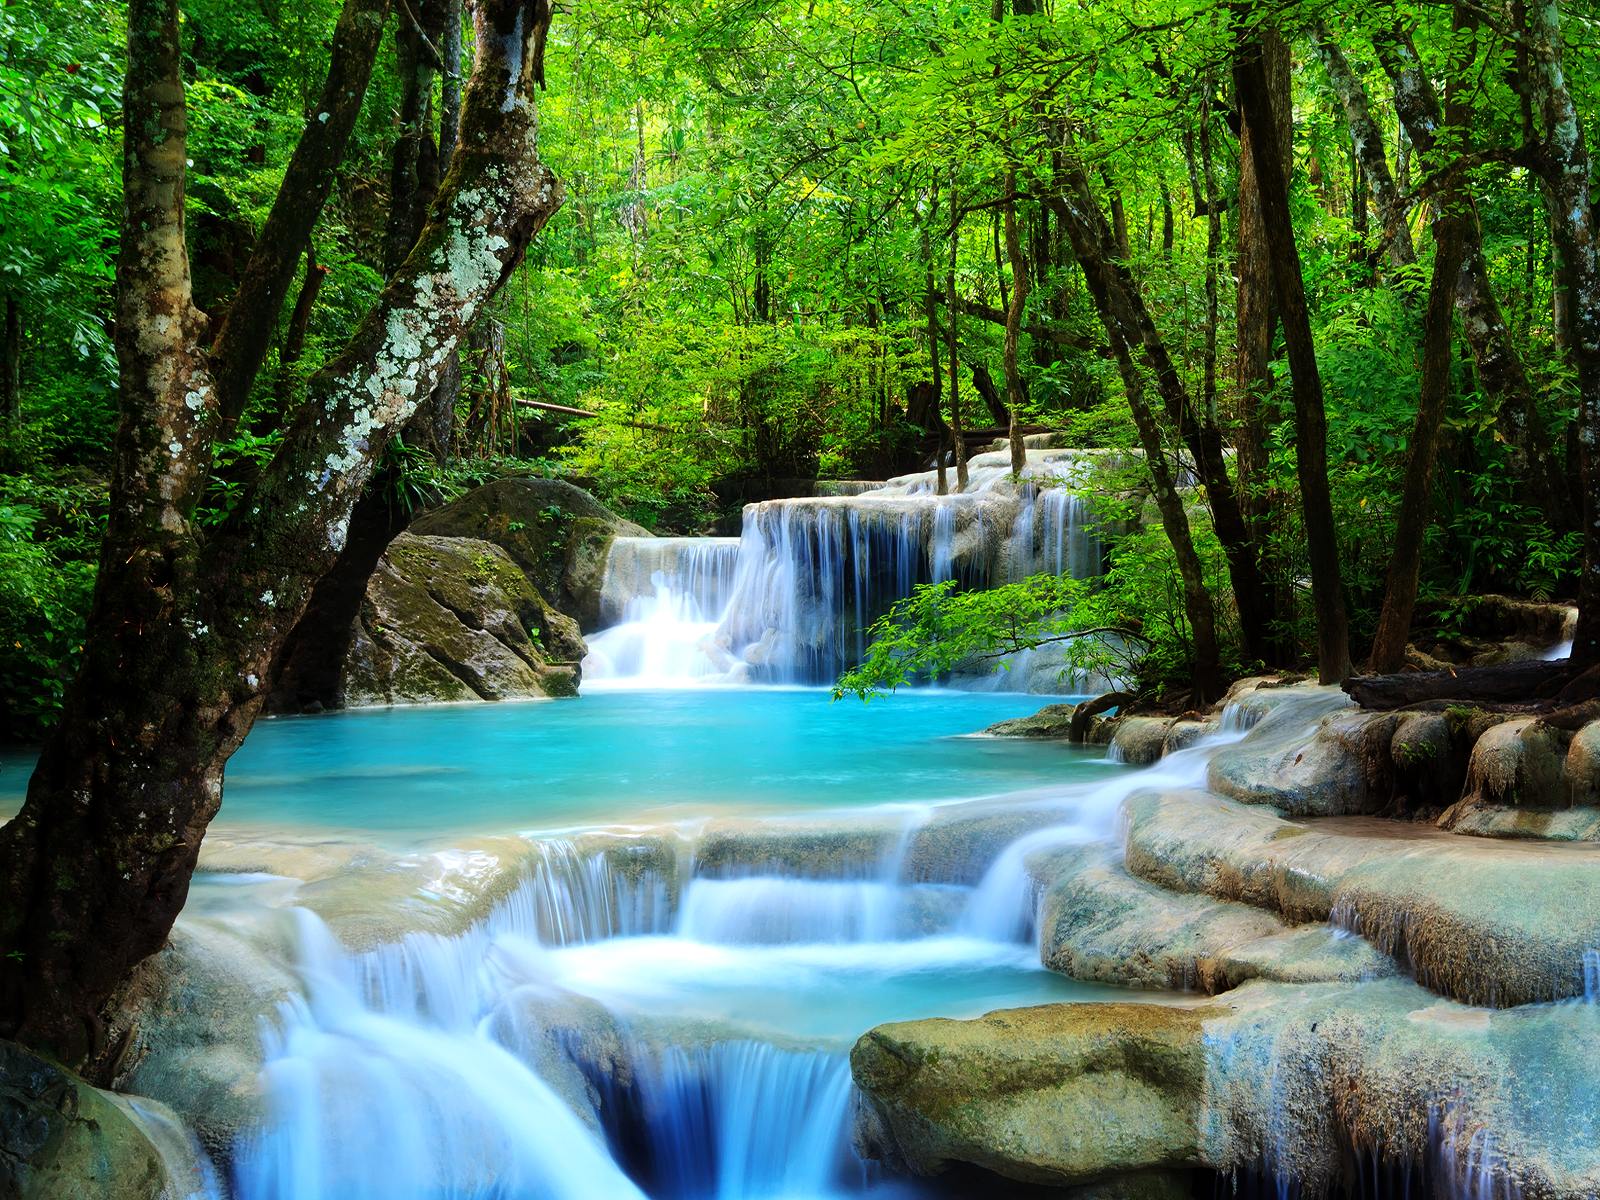 Nature Water Waterfall Live Wallpaper - free download